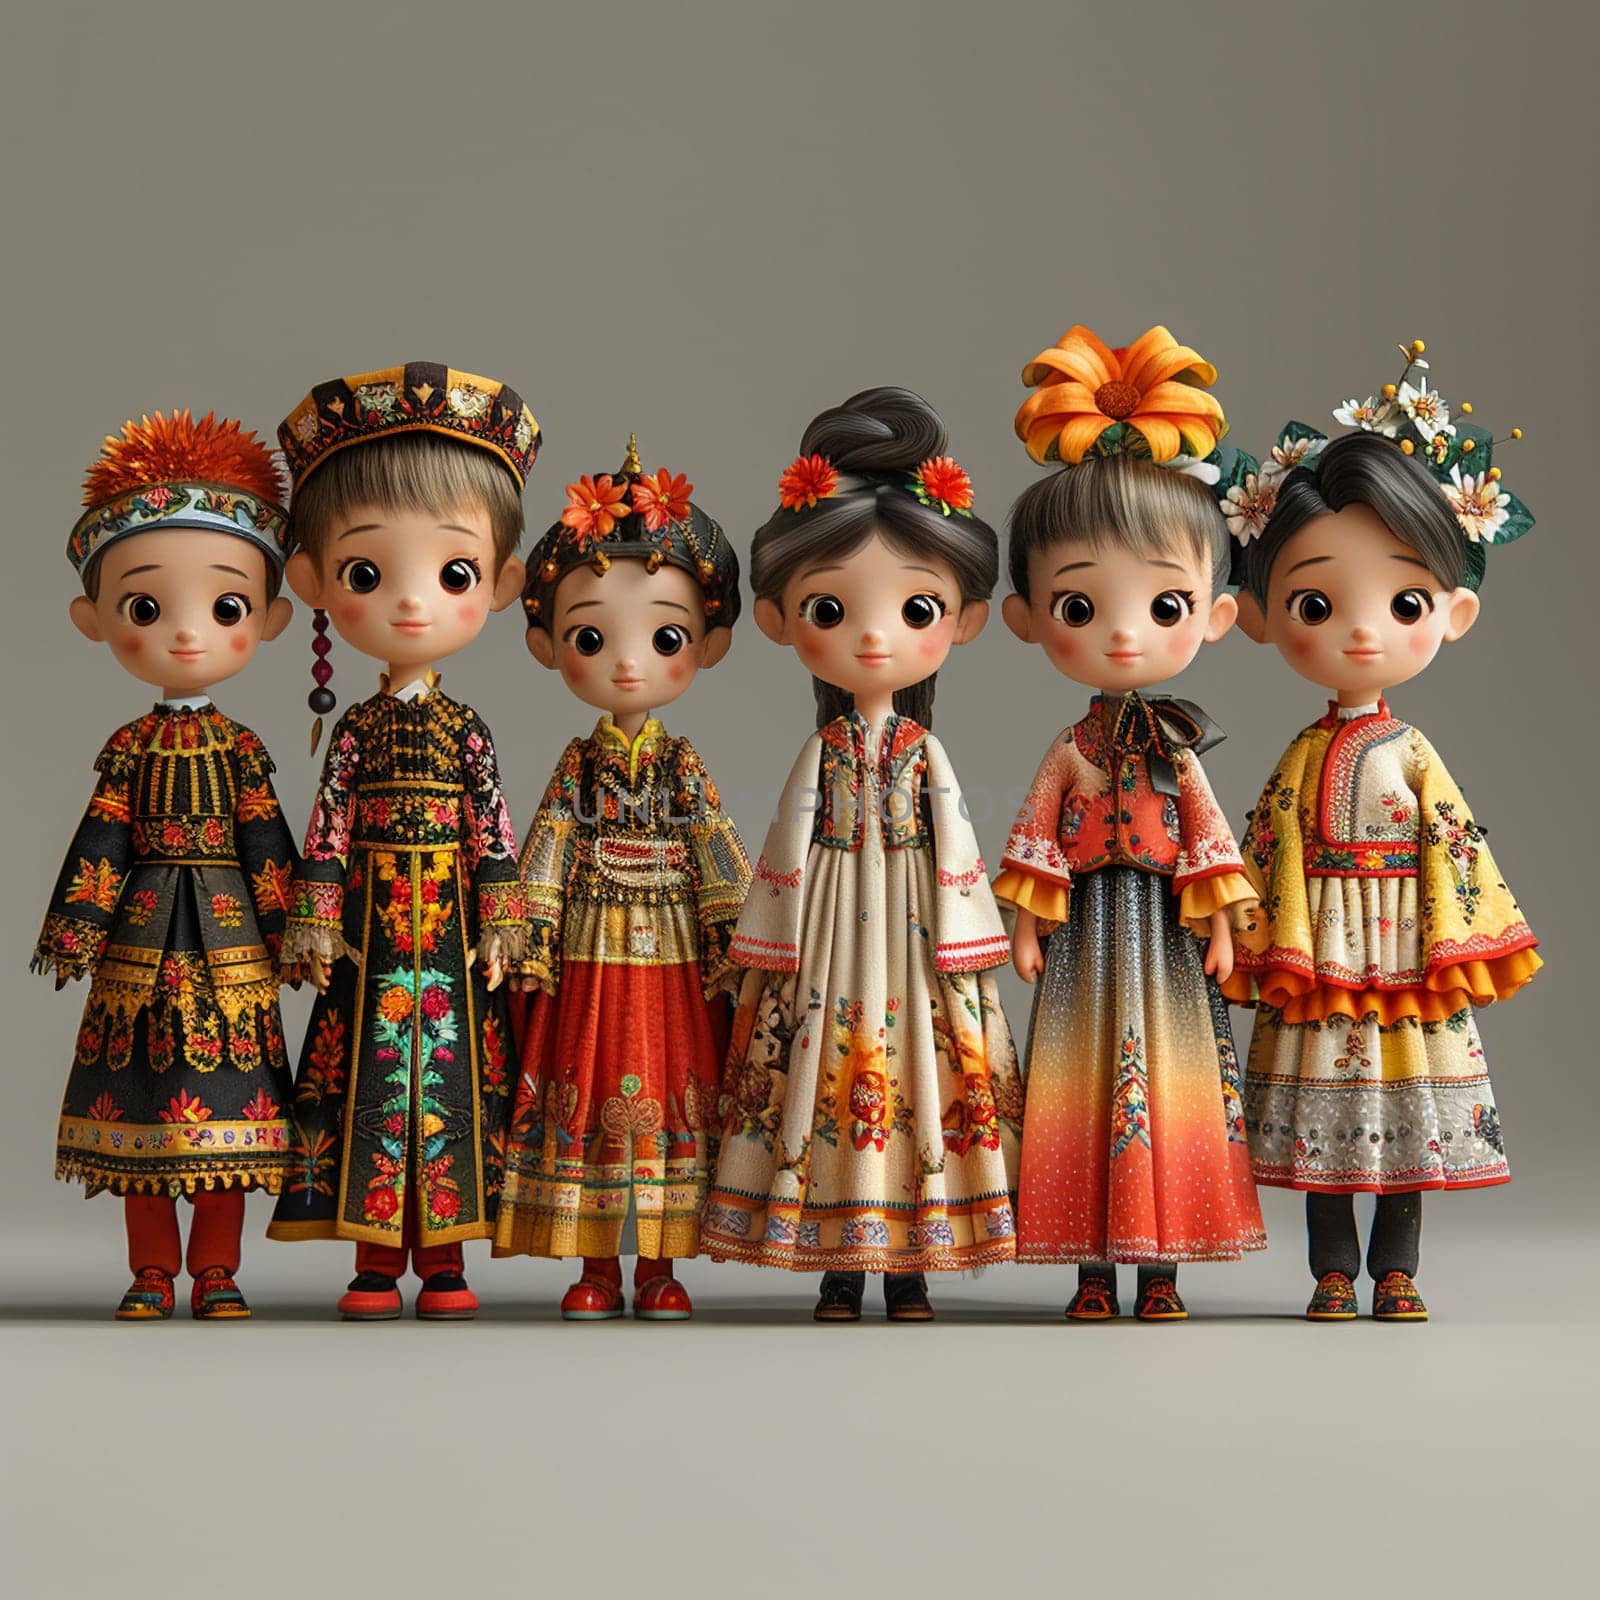 Poster series featuring traditional outfits from around world for multicultural Martisor celebration